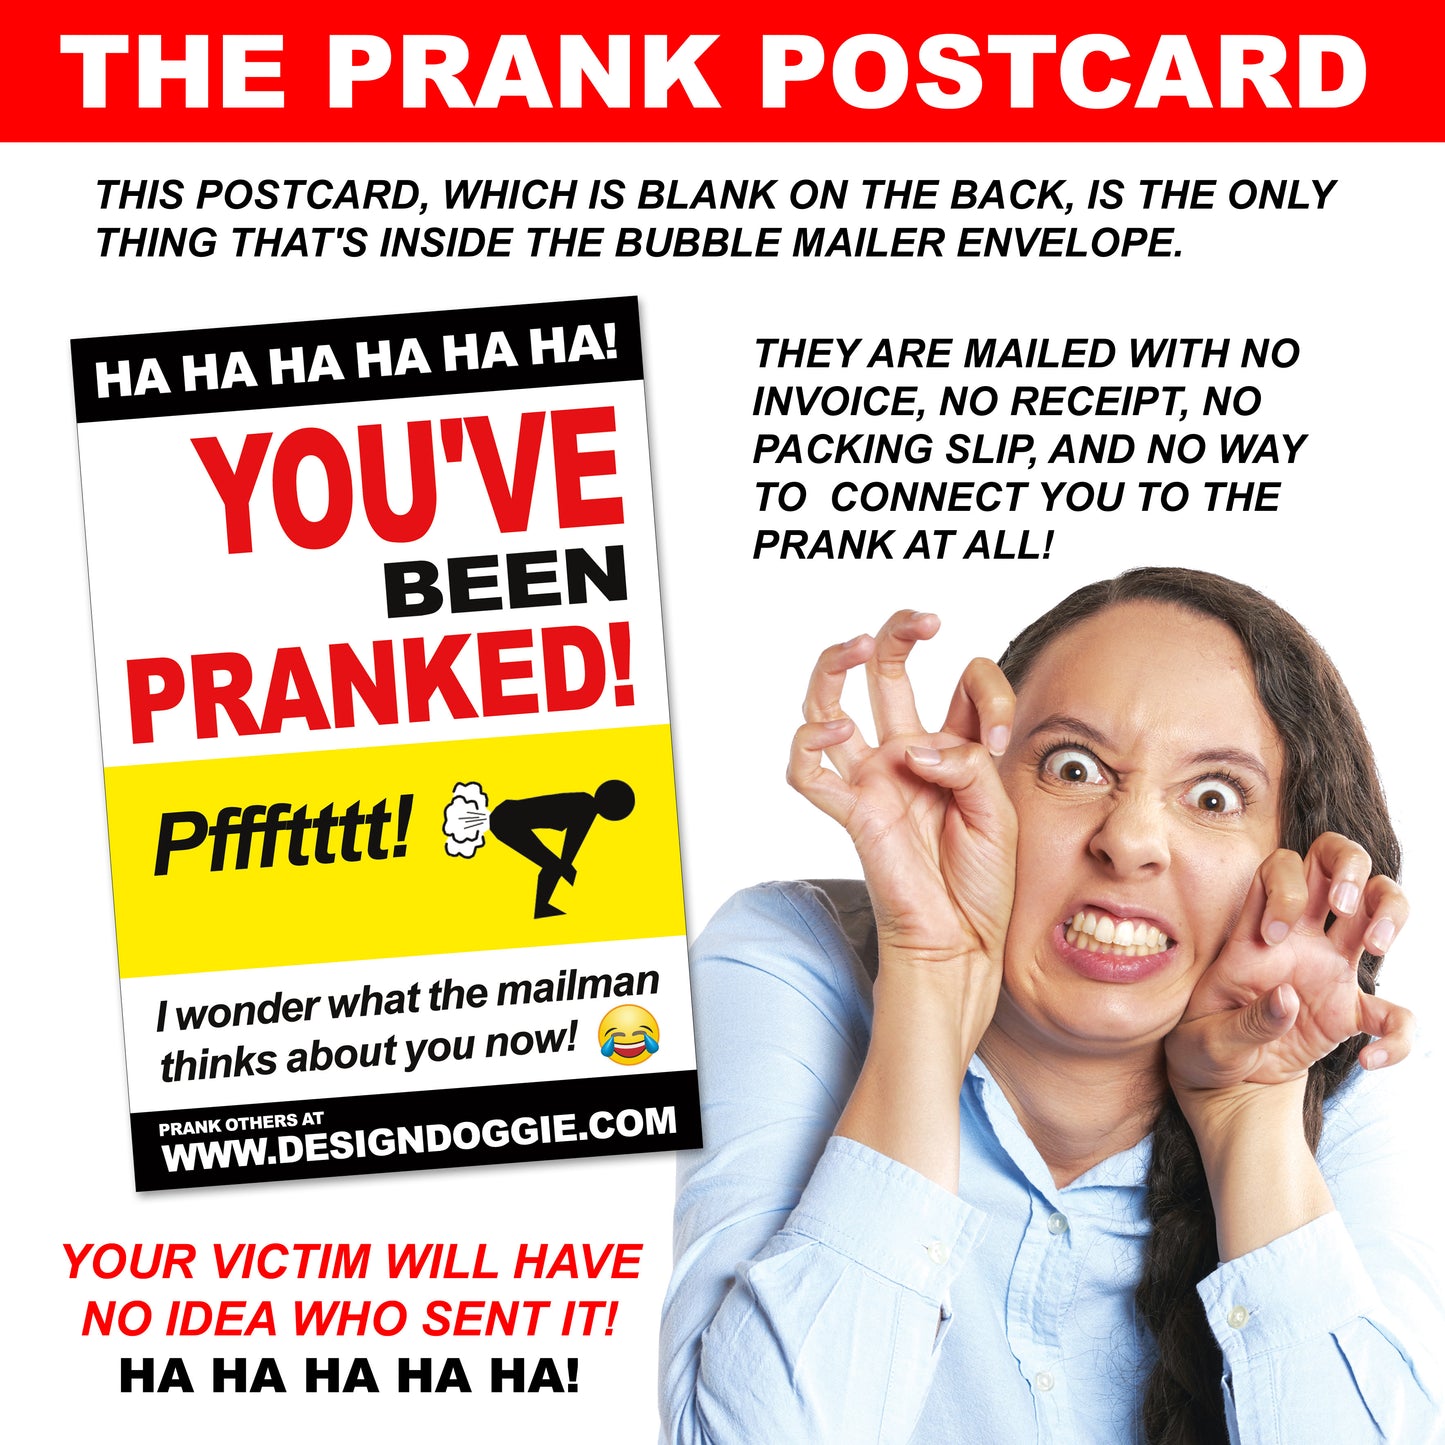 Smell My G-String - with fake elastic hanging out, embarrassing prank envelope gets mailed directly to your victims 100% anonymously!